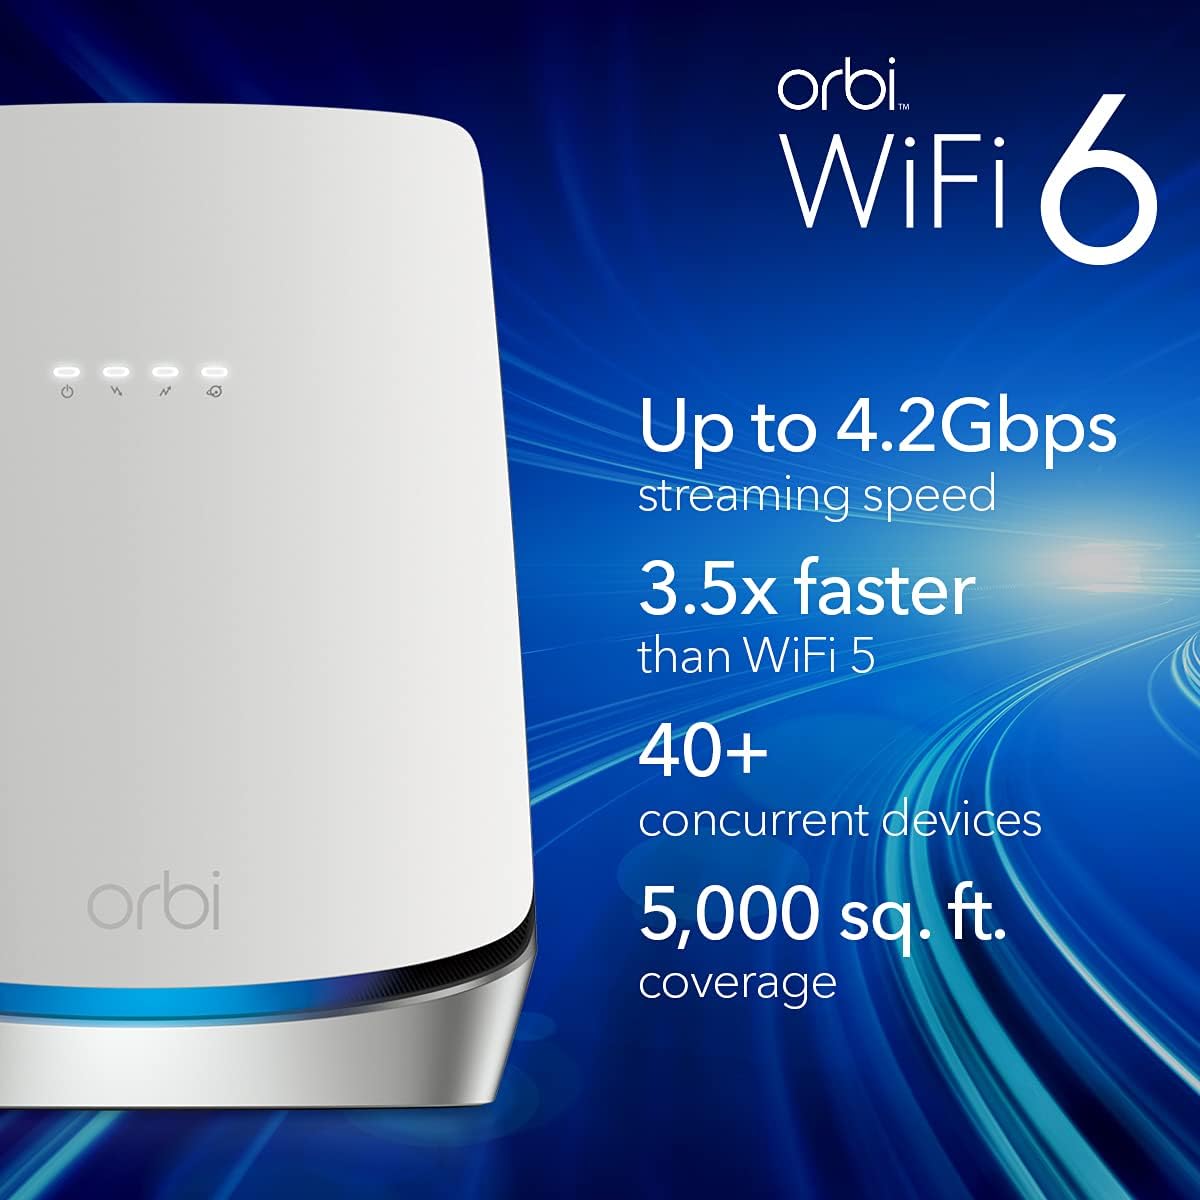 NETGEAR Orbi Whole Home WiFi 6 System with DOCSIS 3.1 Built-in Cable Modem - $455